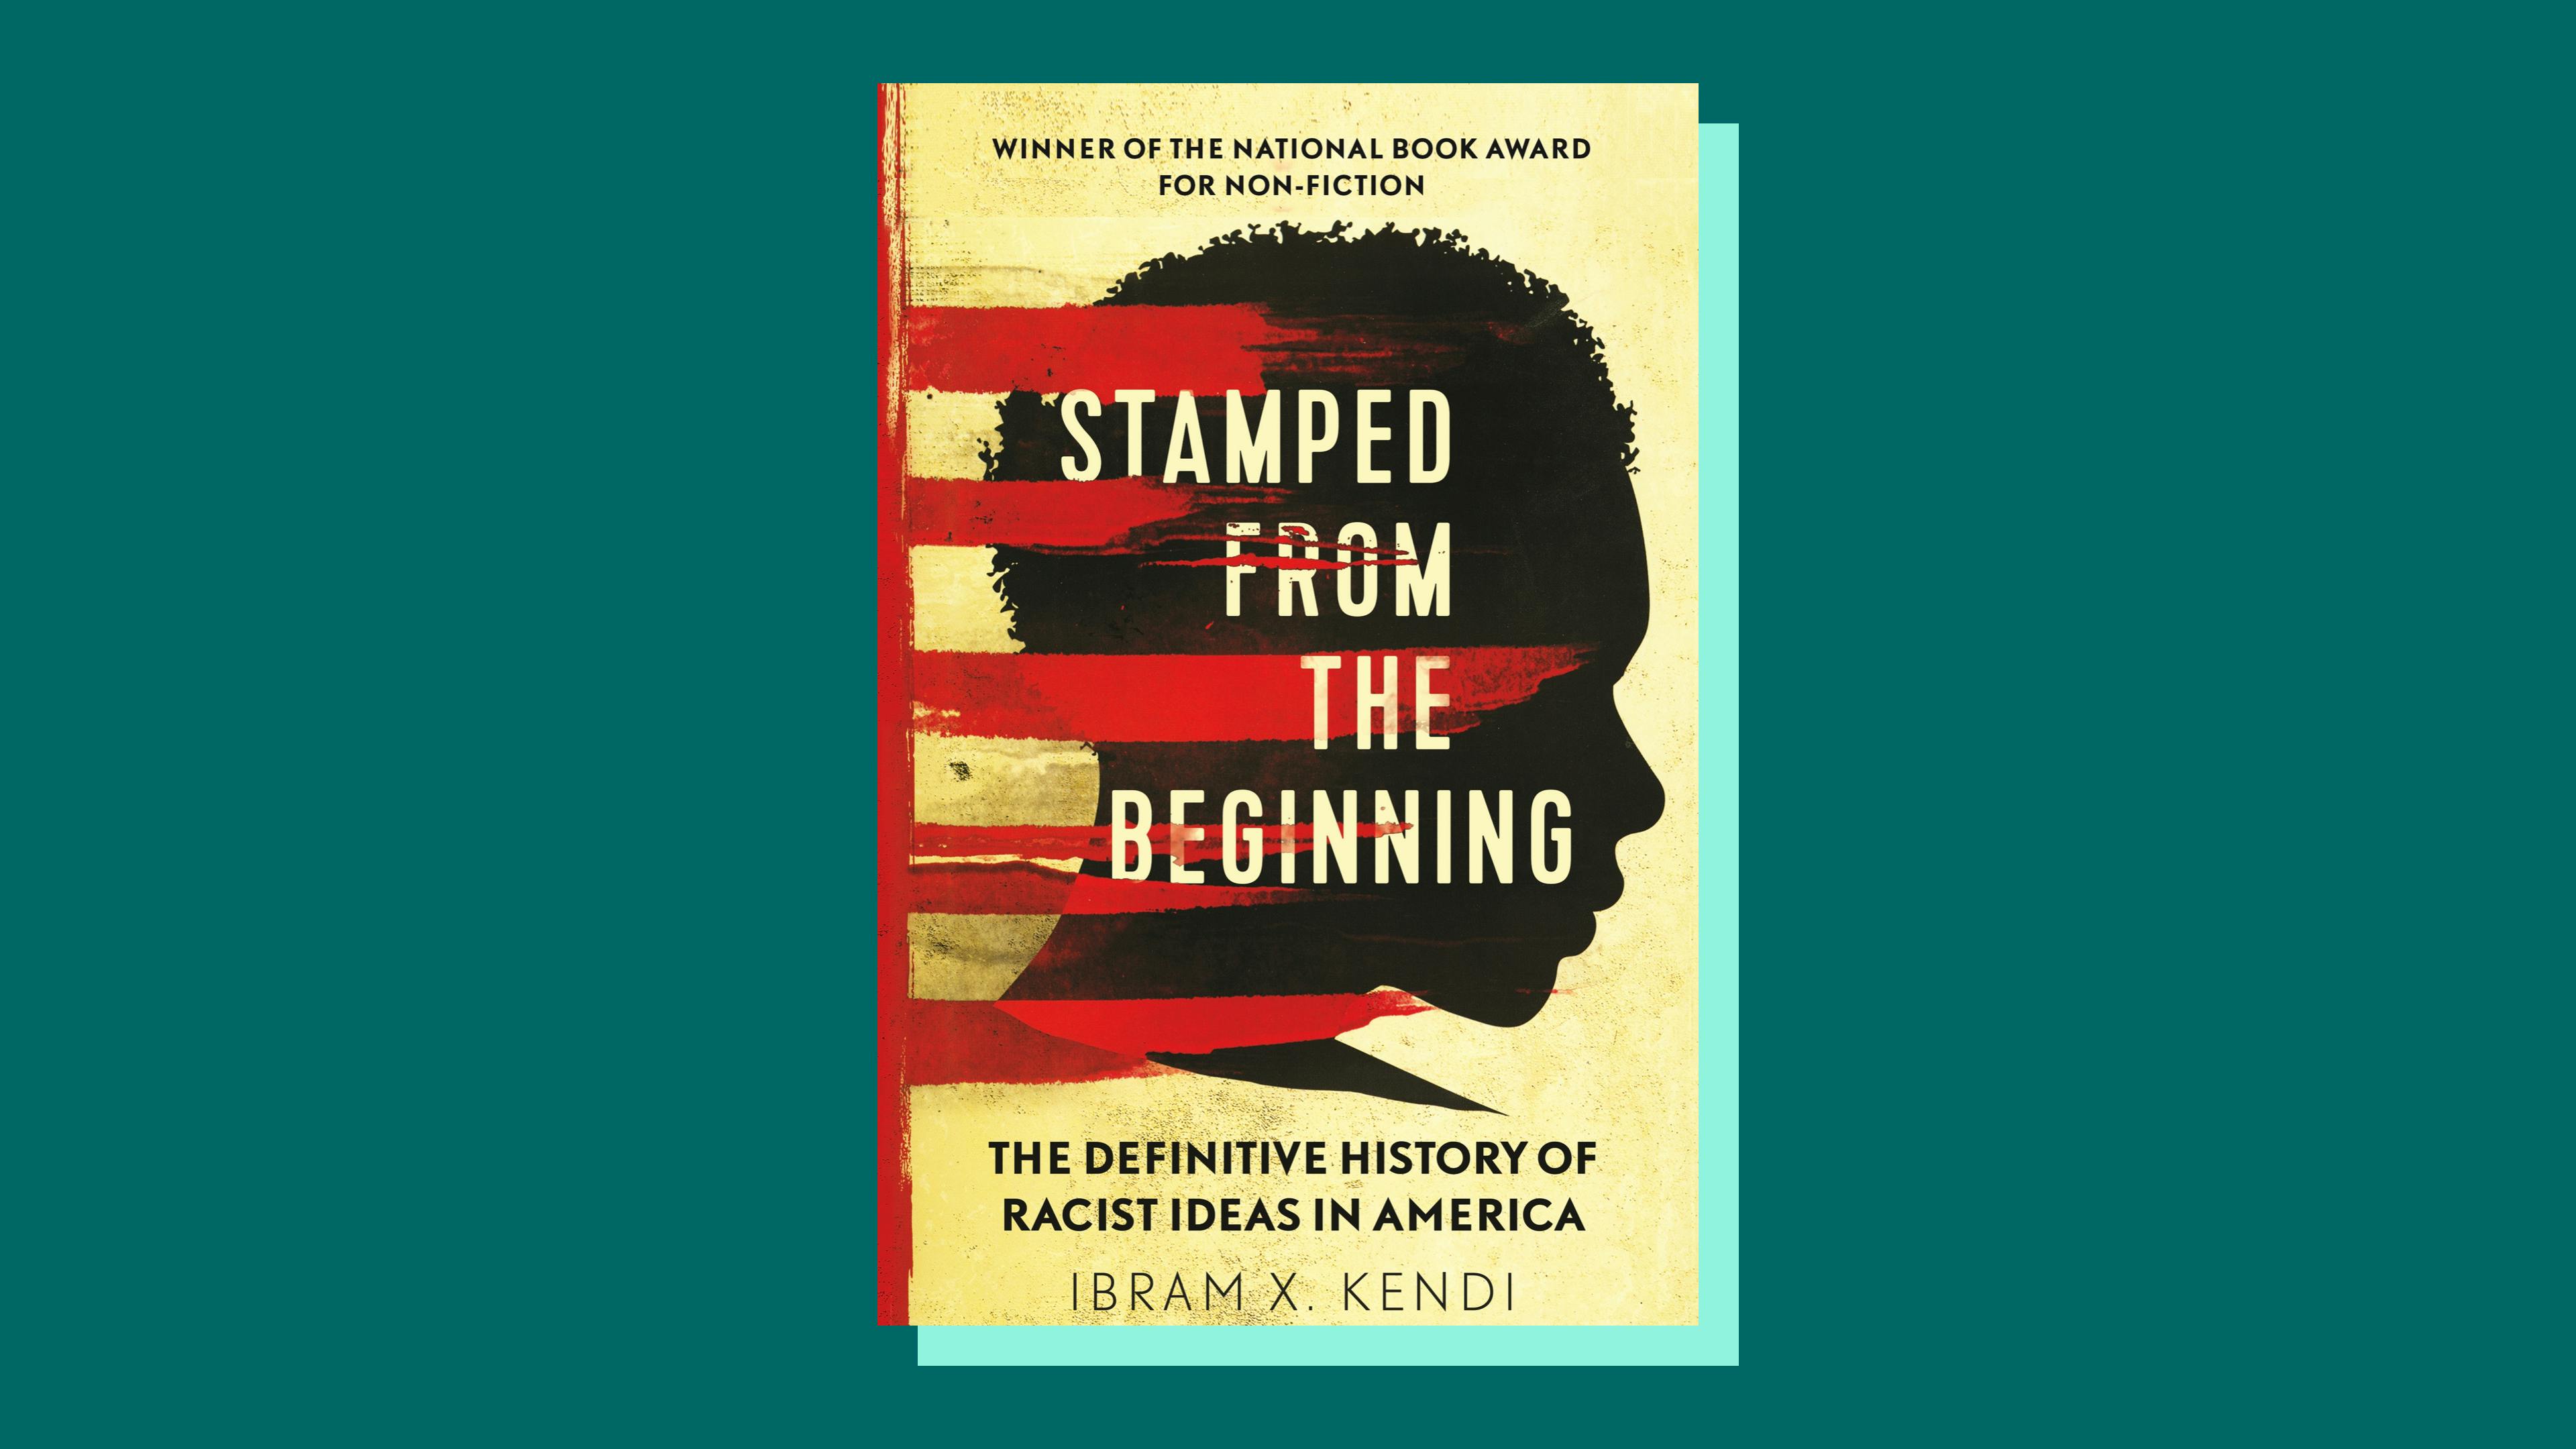 “Stamped from the Beginning: The Definitive History of Racist Ideas in America” by Ibram X. Kendi 